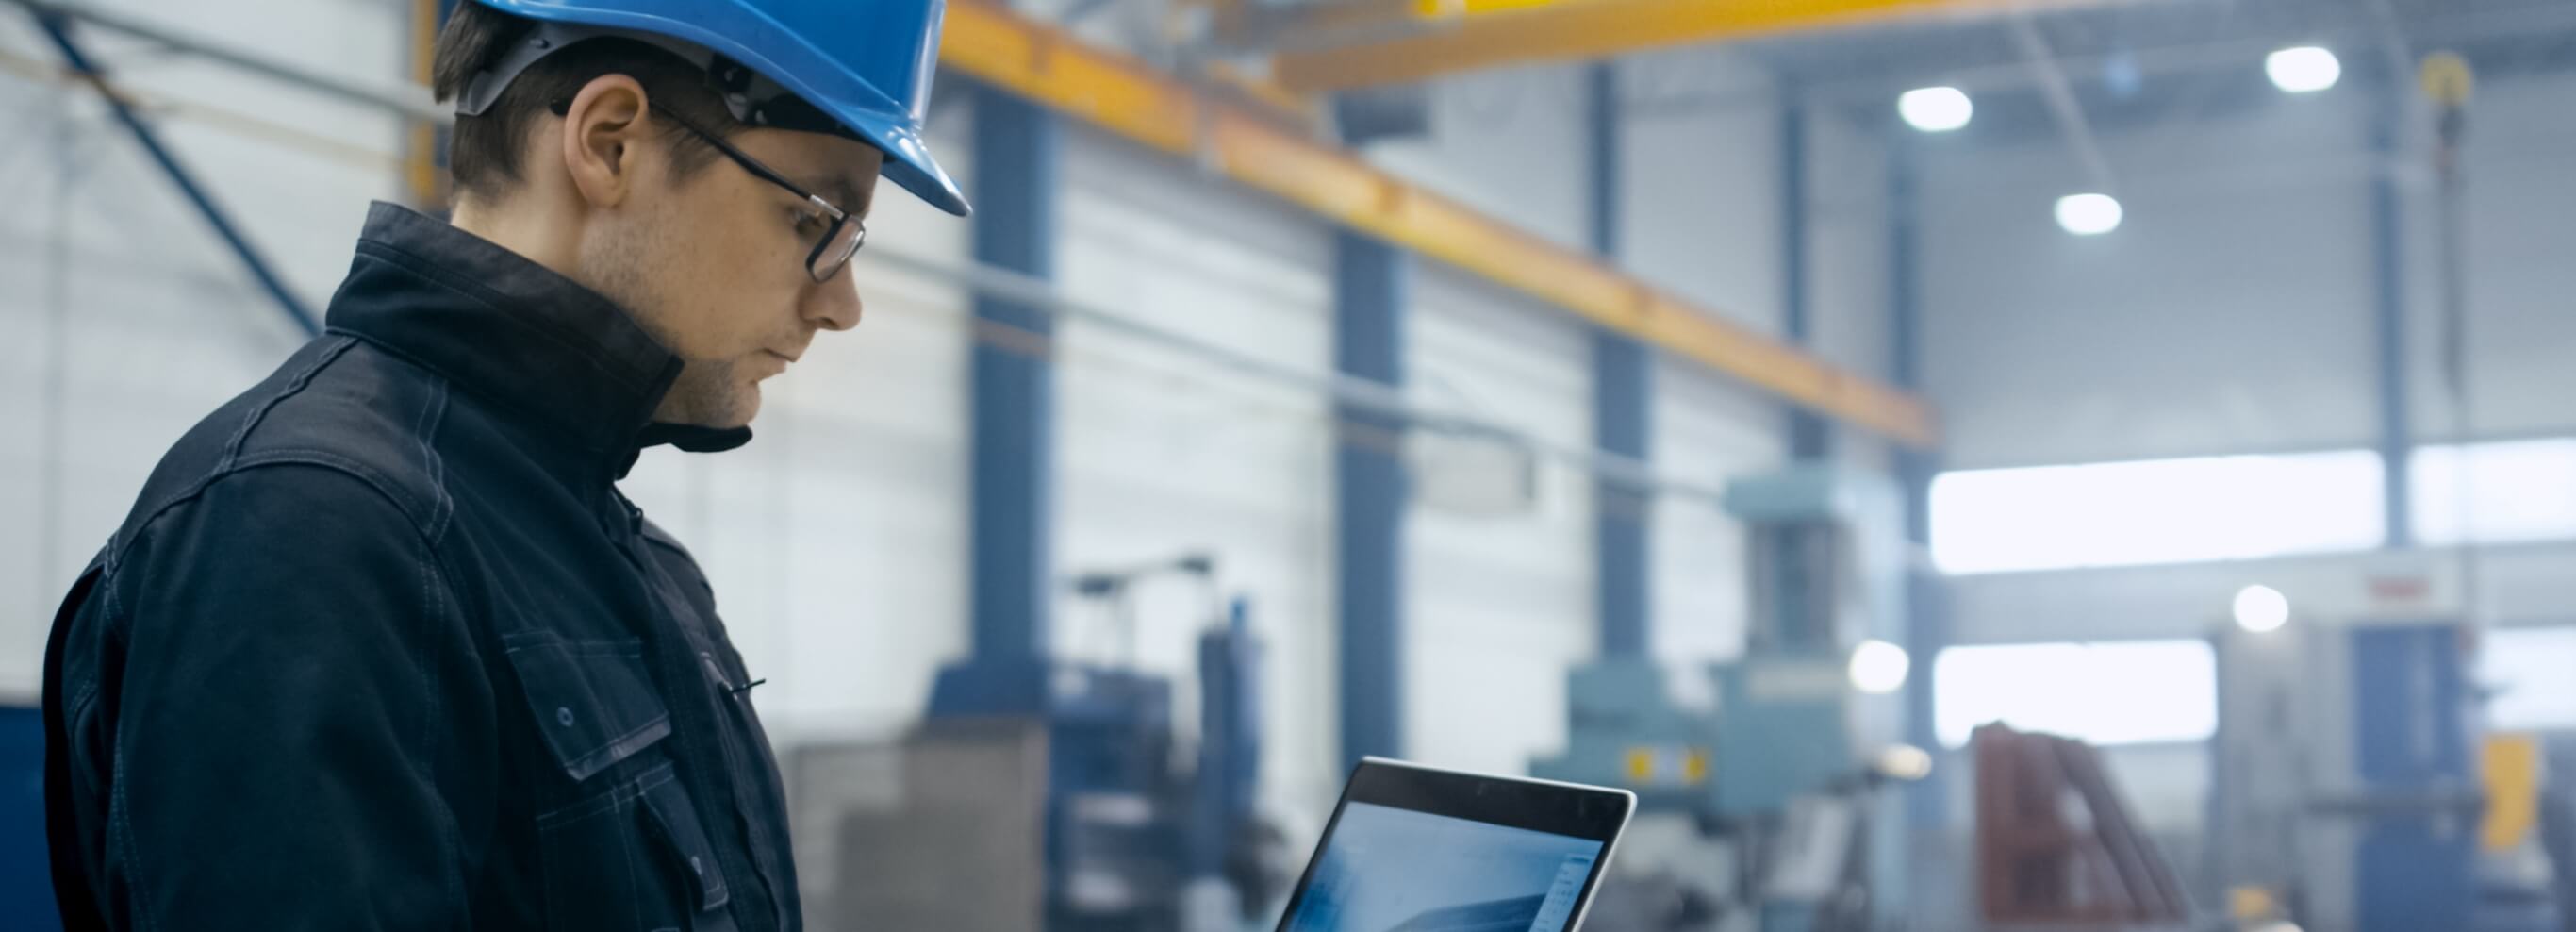 construction worker looking at a laptop in a warehouse